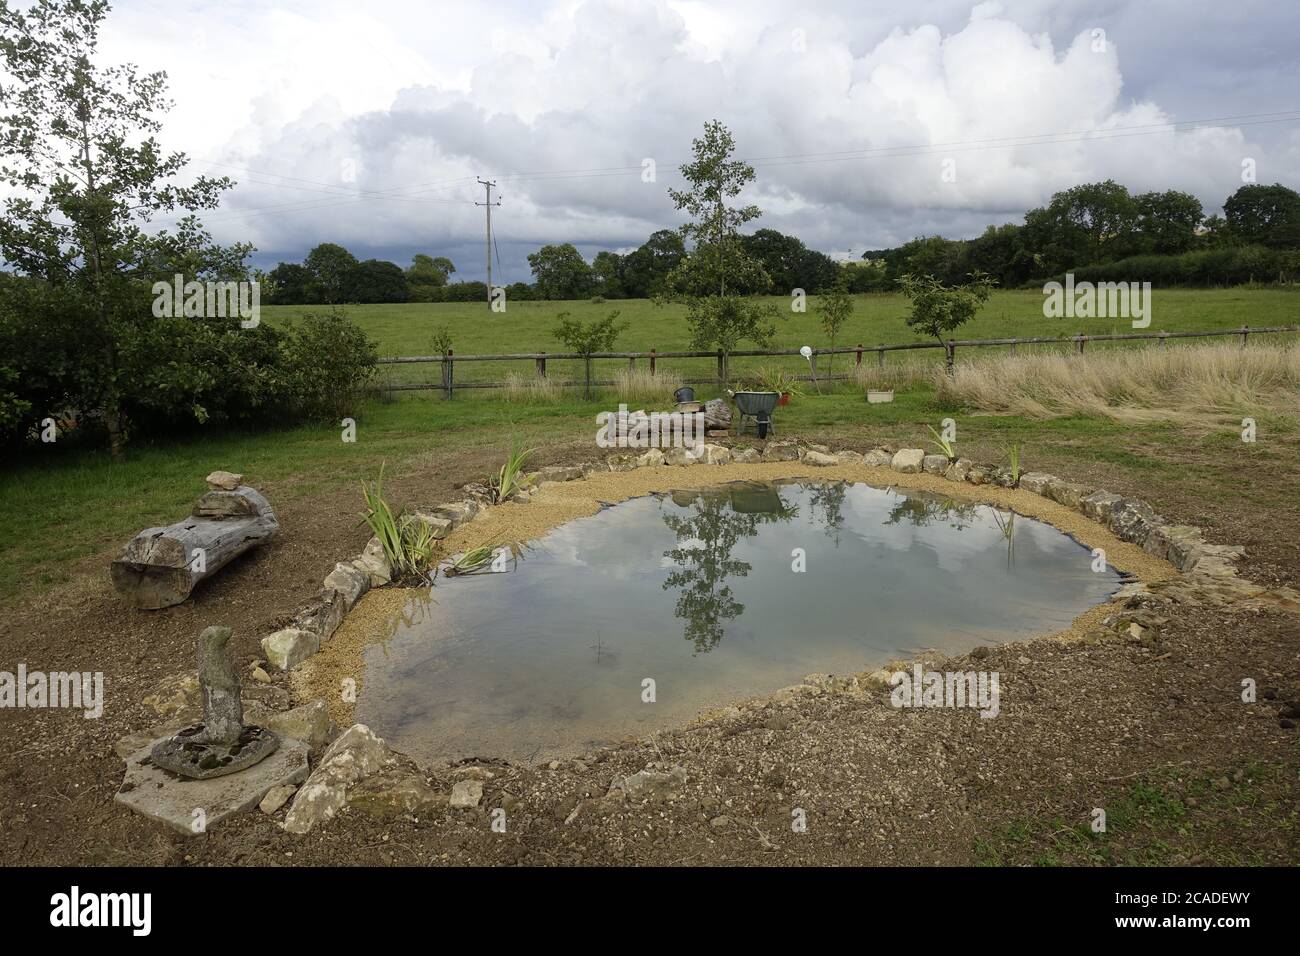 Garden pond construction using EPDM rubber pond liner, Cpotswolds, UK Stock Photo